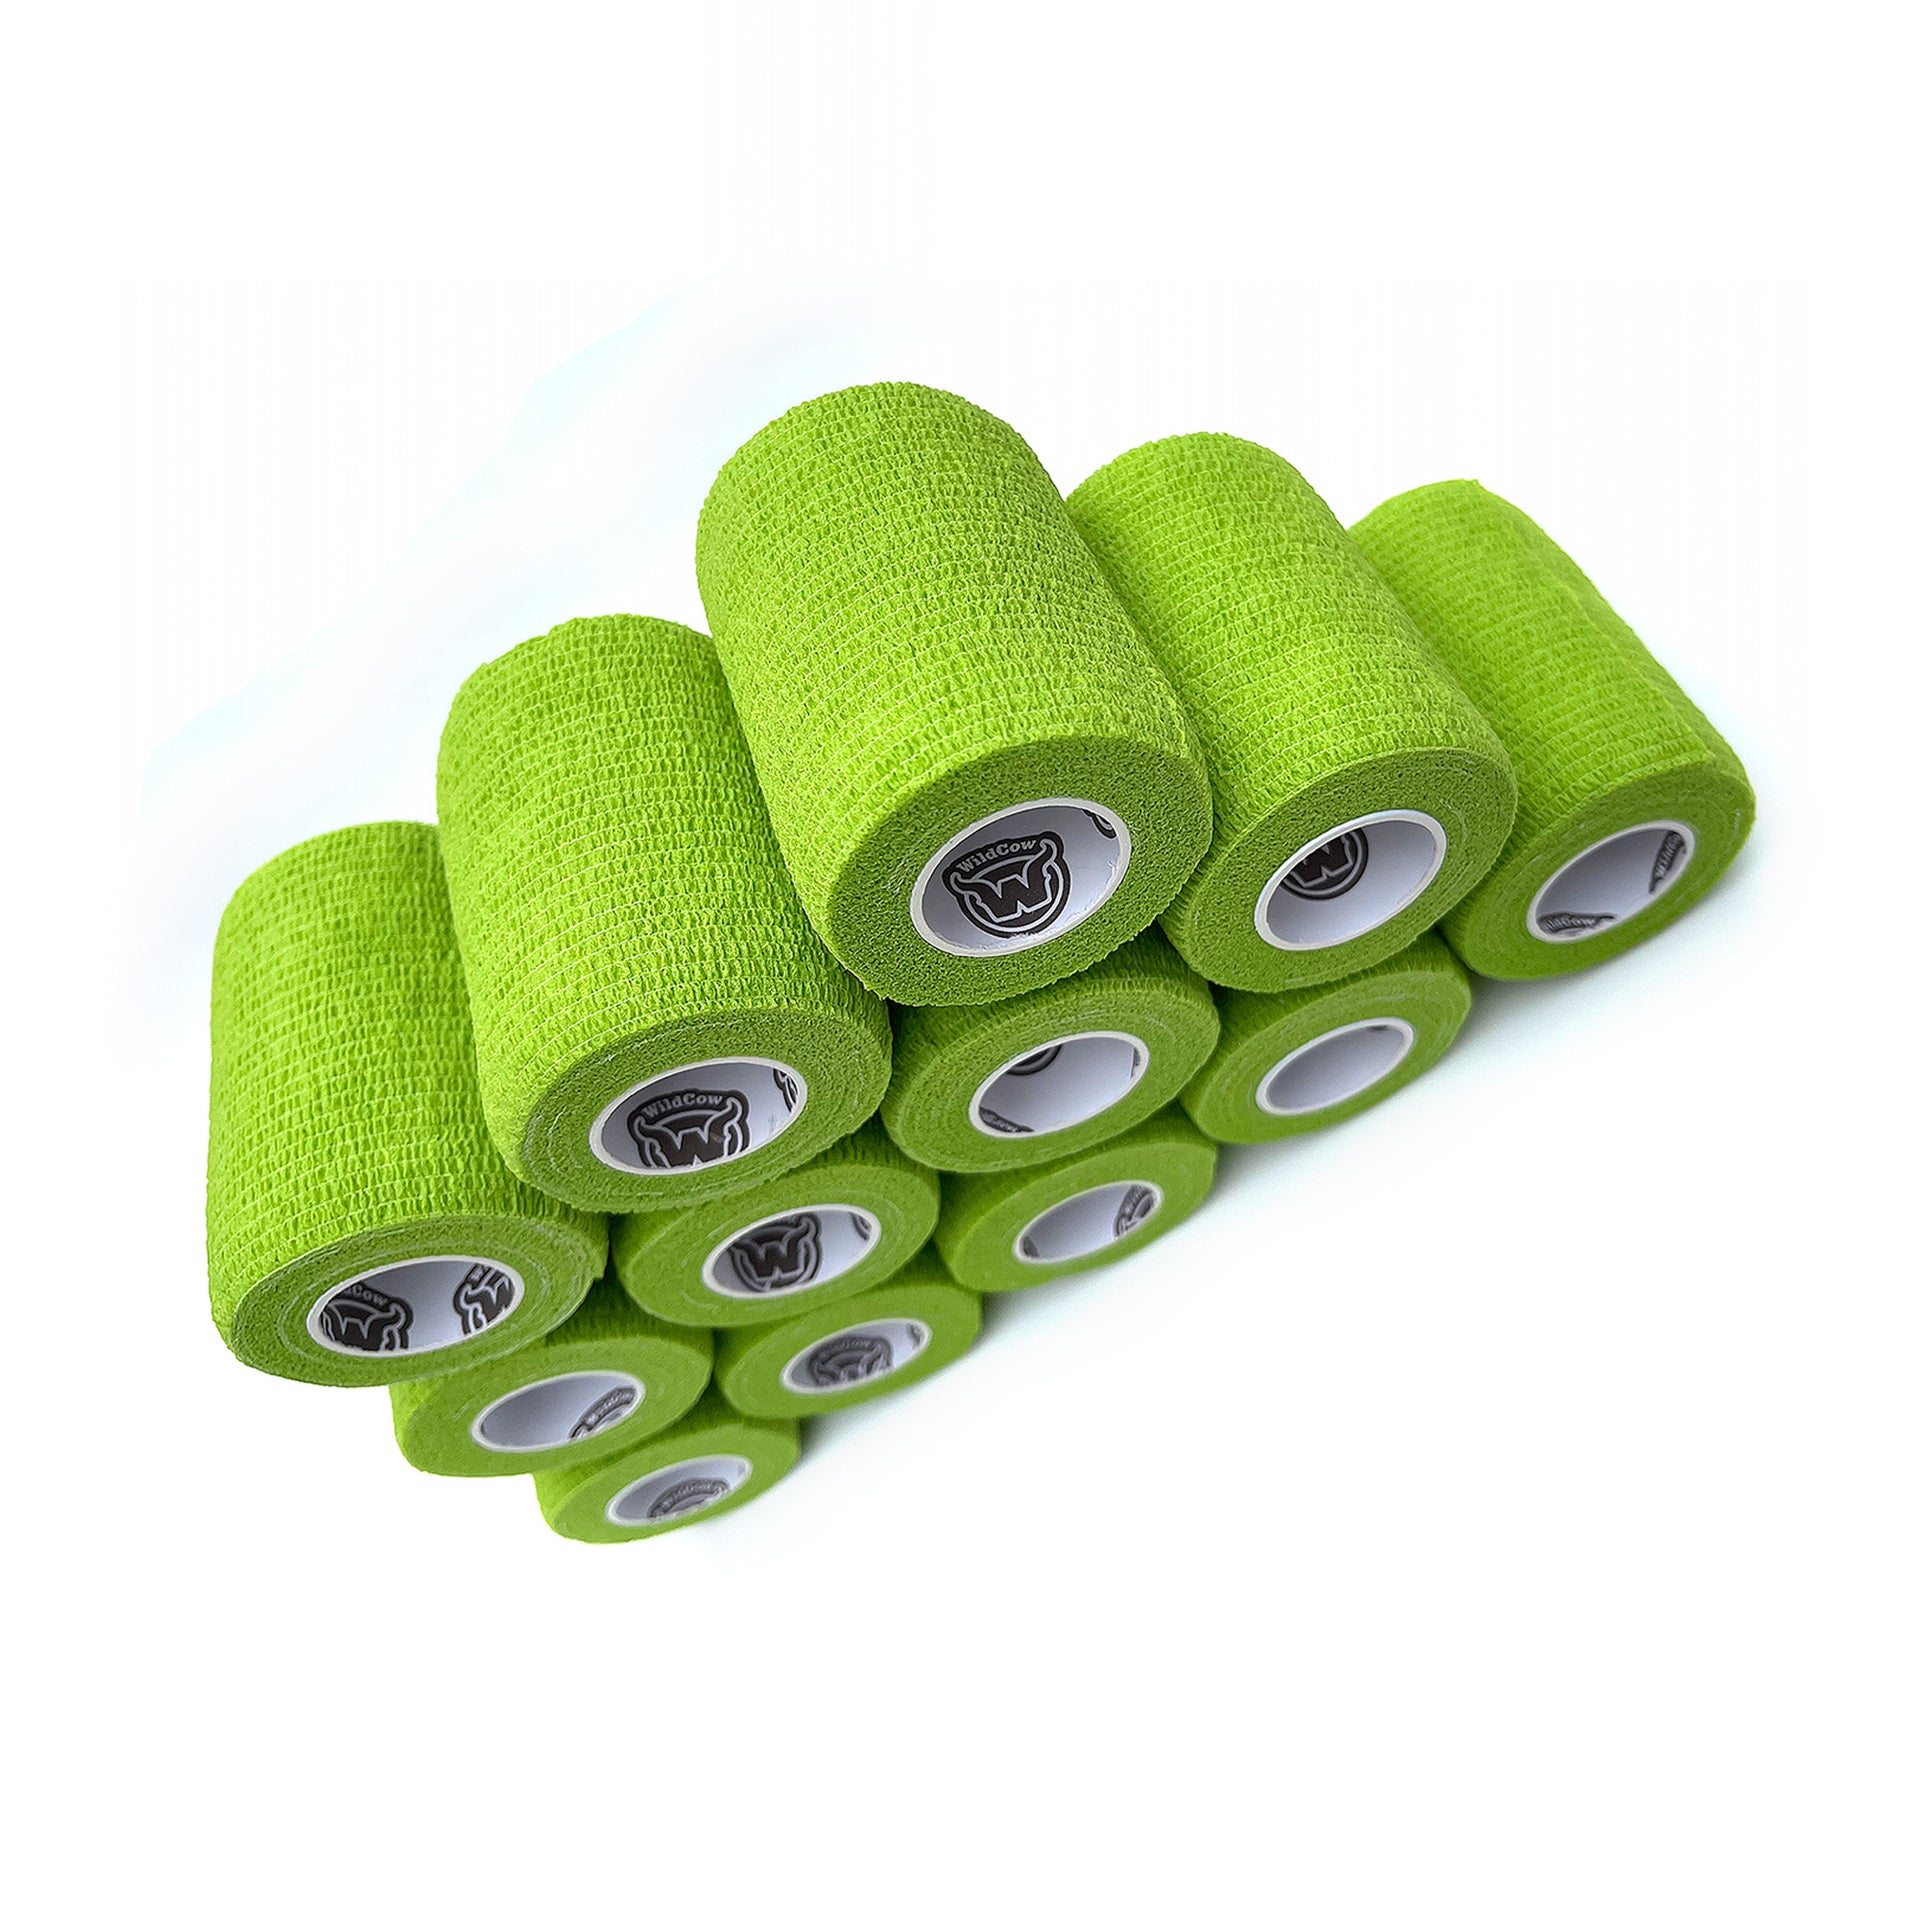 12 Pack of WildCow 3 Inch Grass Green Vet Wrap